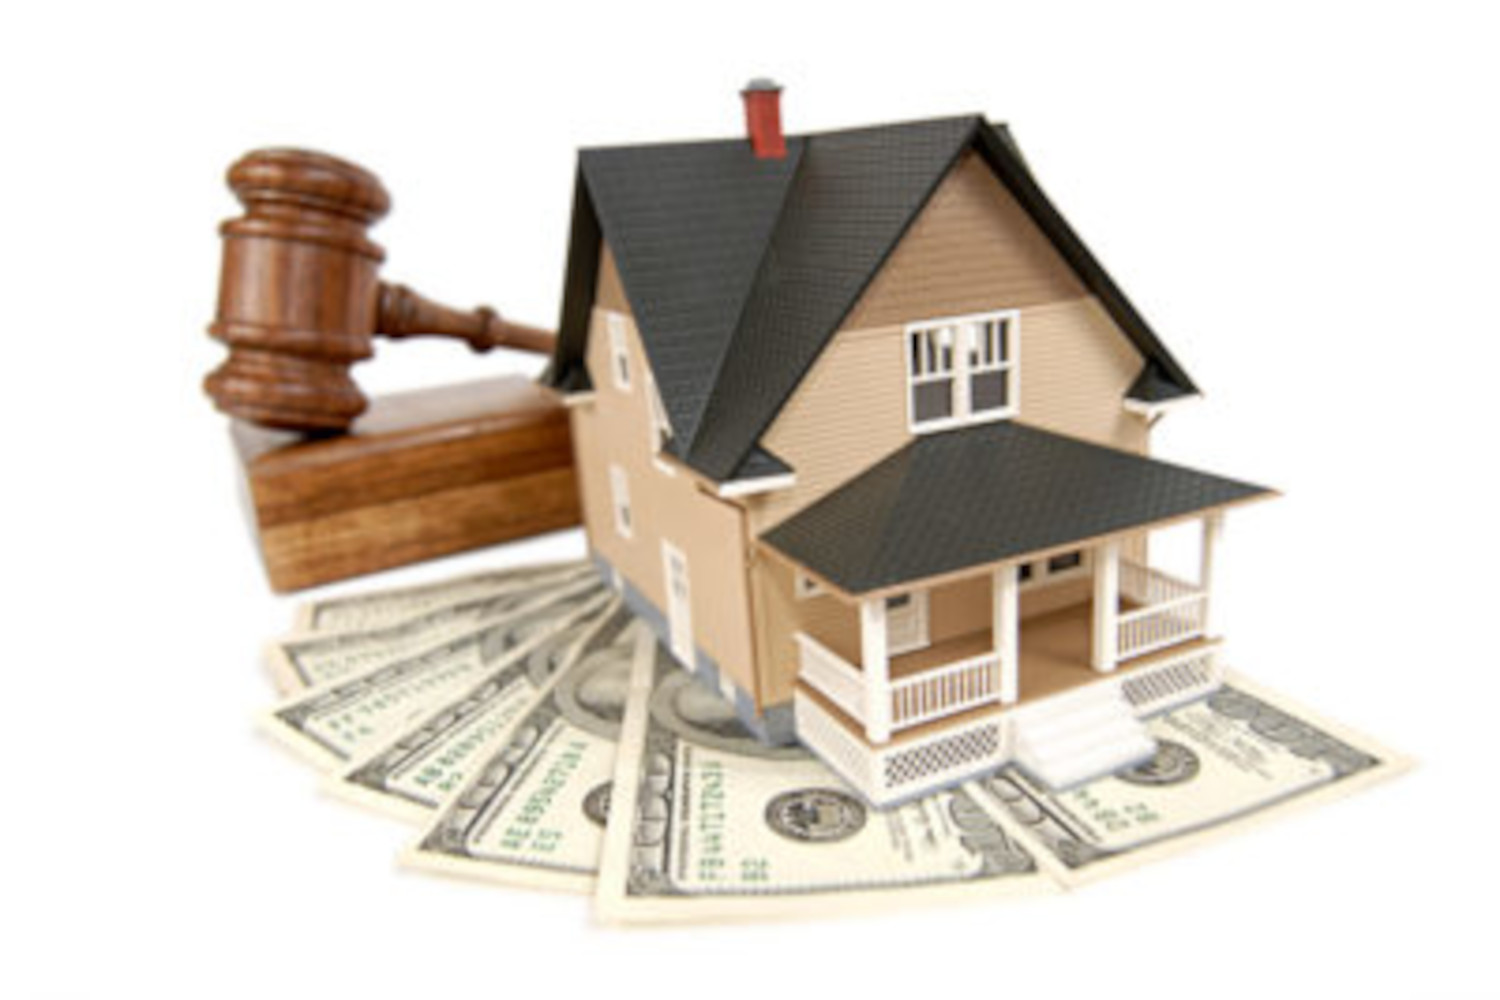 What Takes Priority? The Mortgage or The Lien?